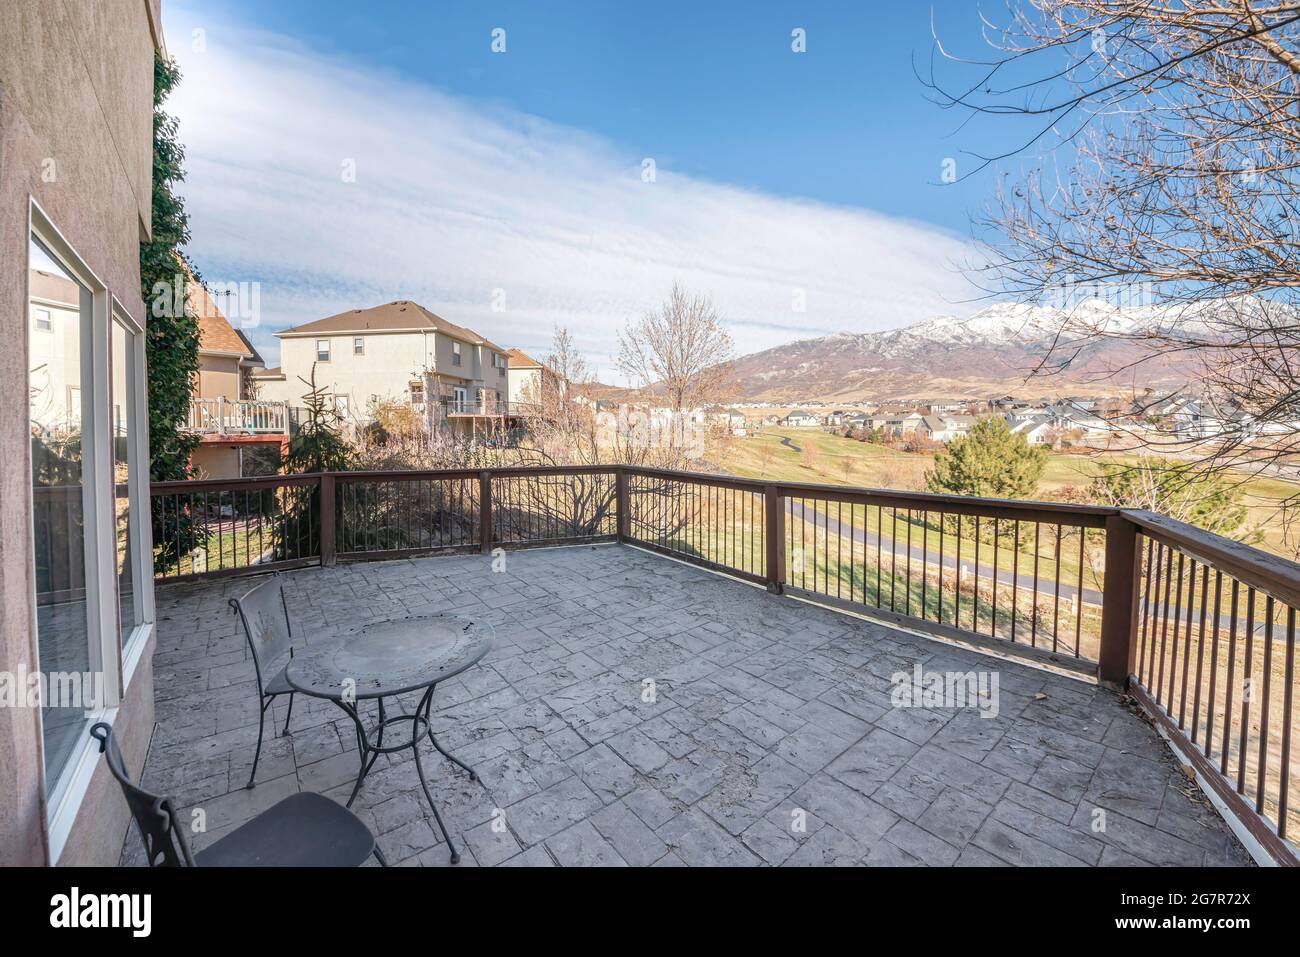 On a terrace of a house with a relaxing sky and mountain views Stock Photo